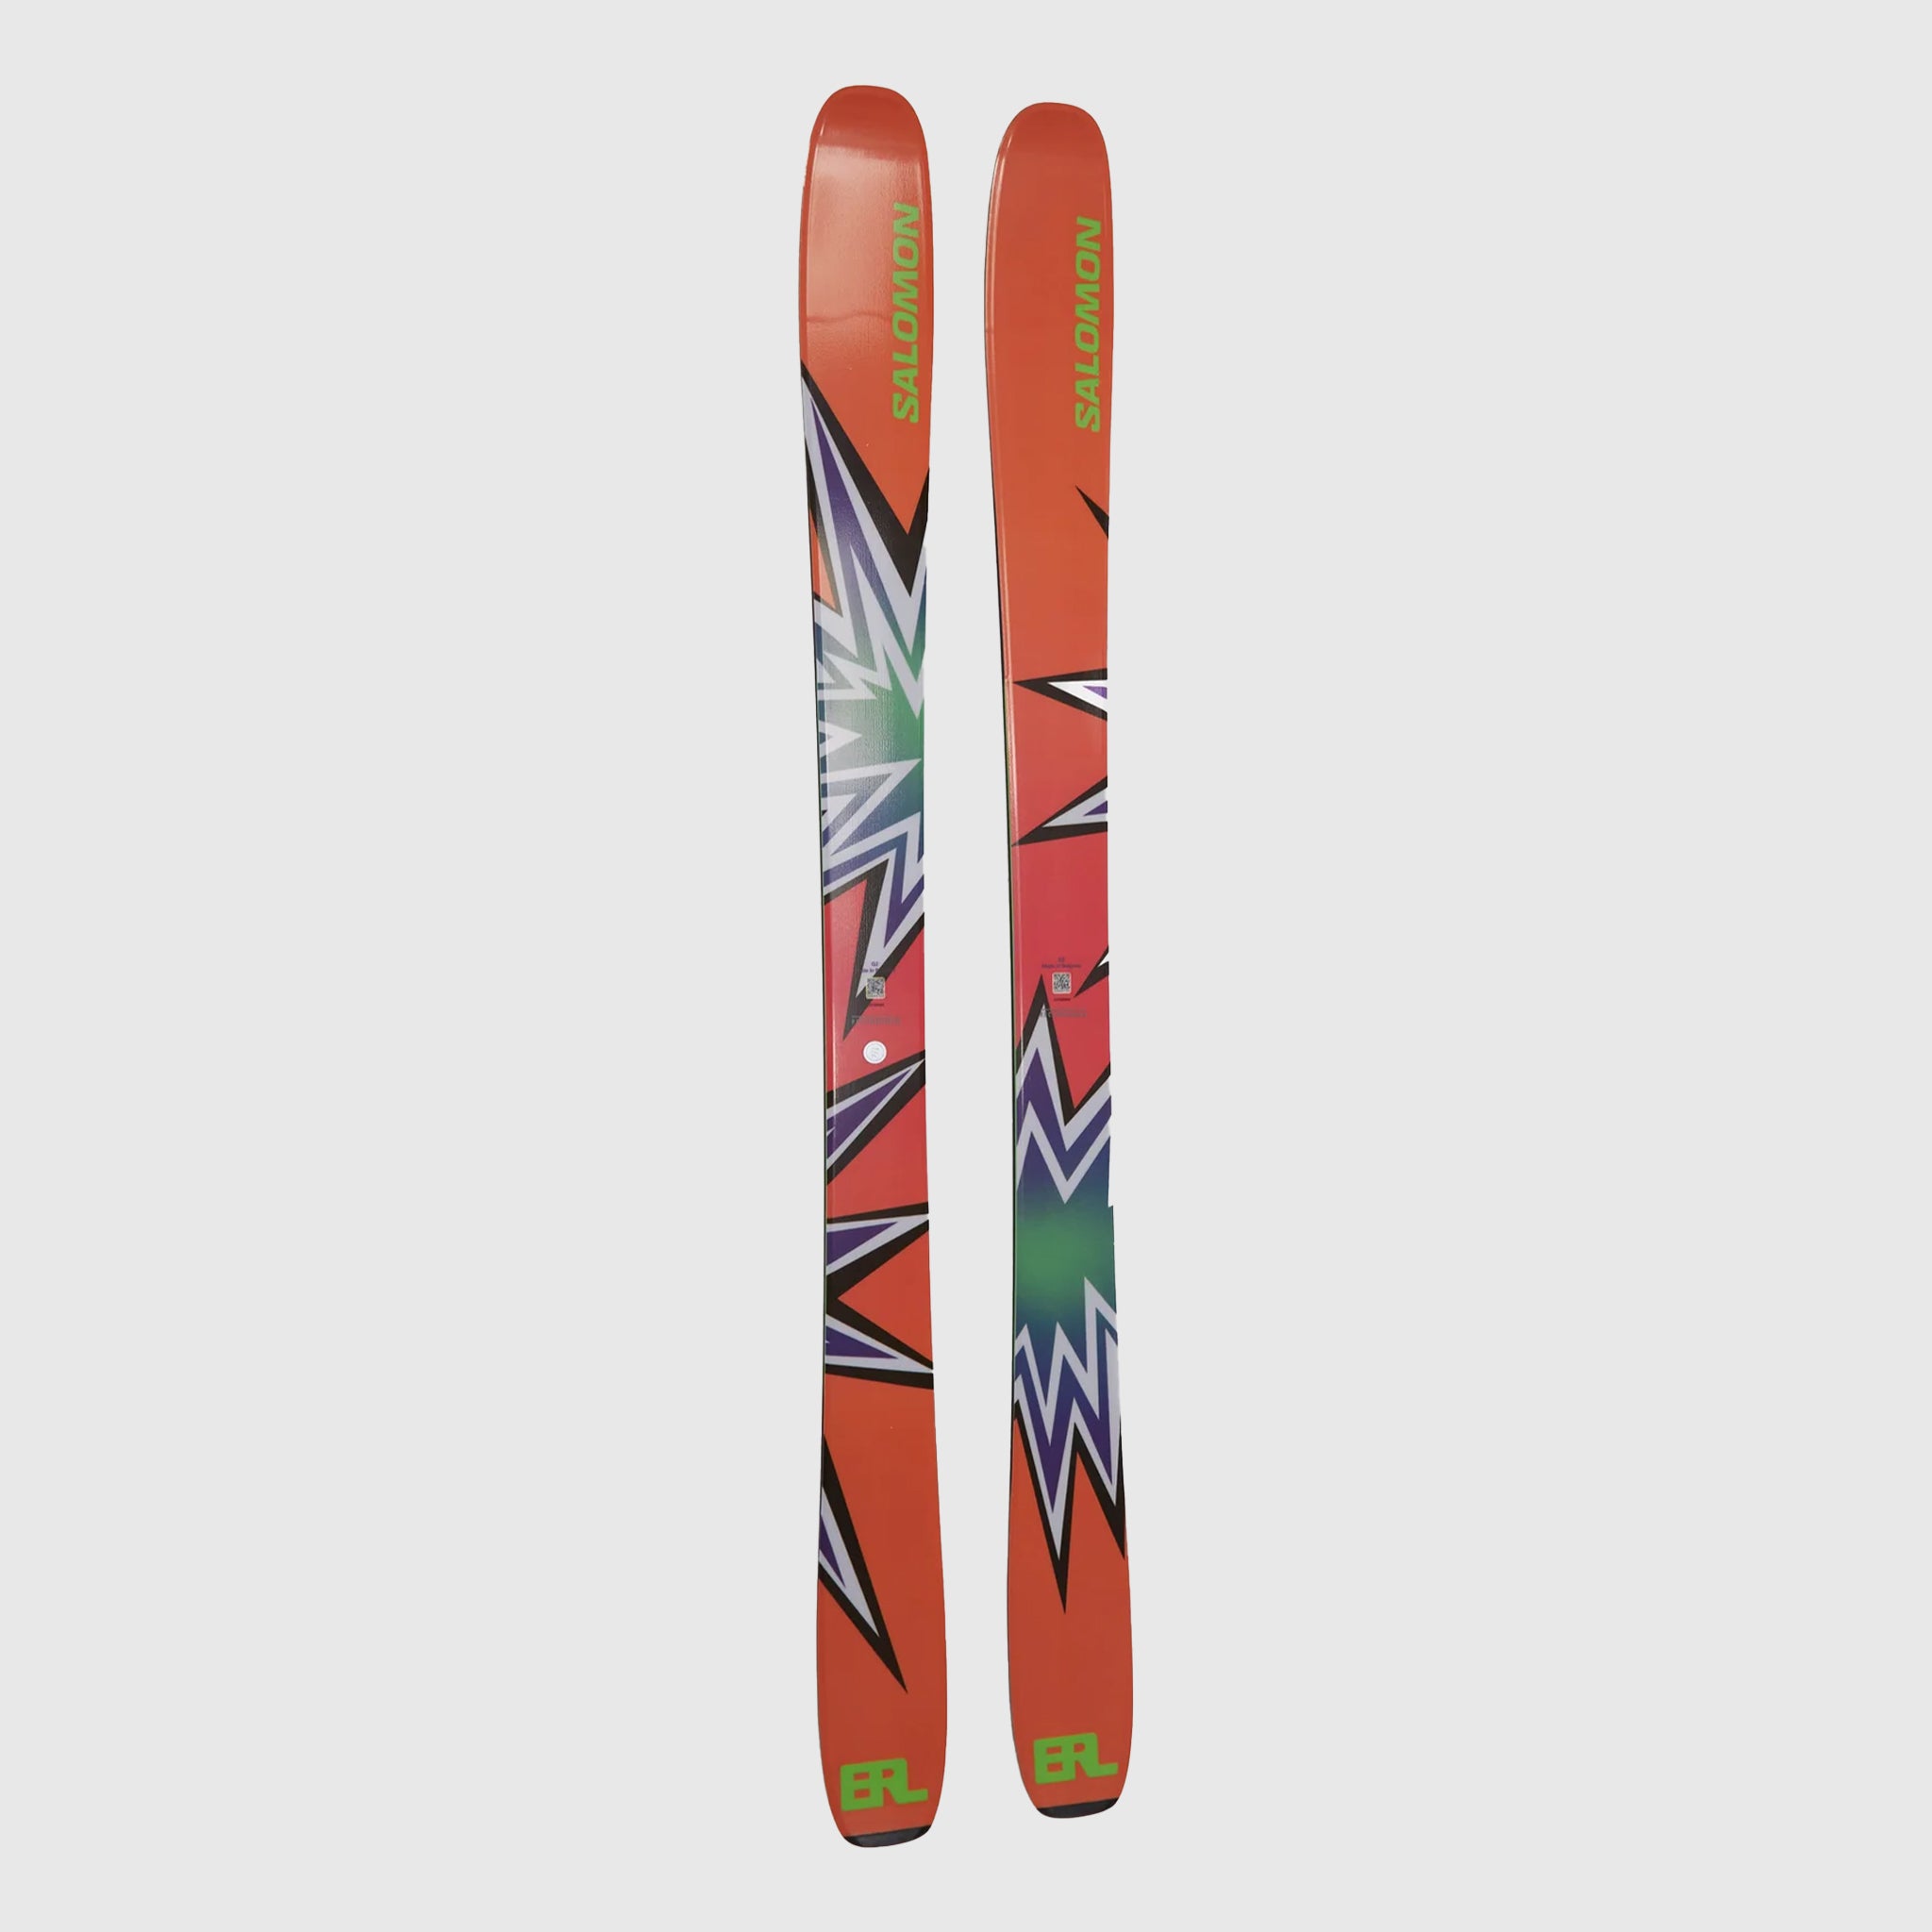 STAR-PRINTED SKIS – PACKER SHOES